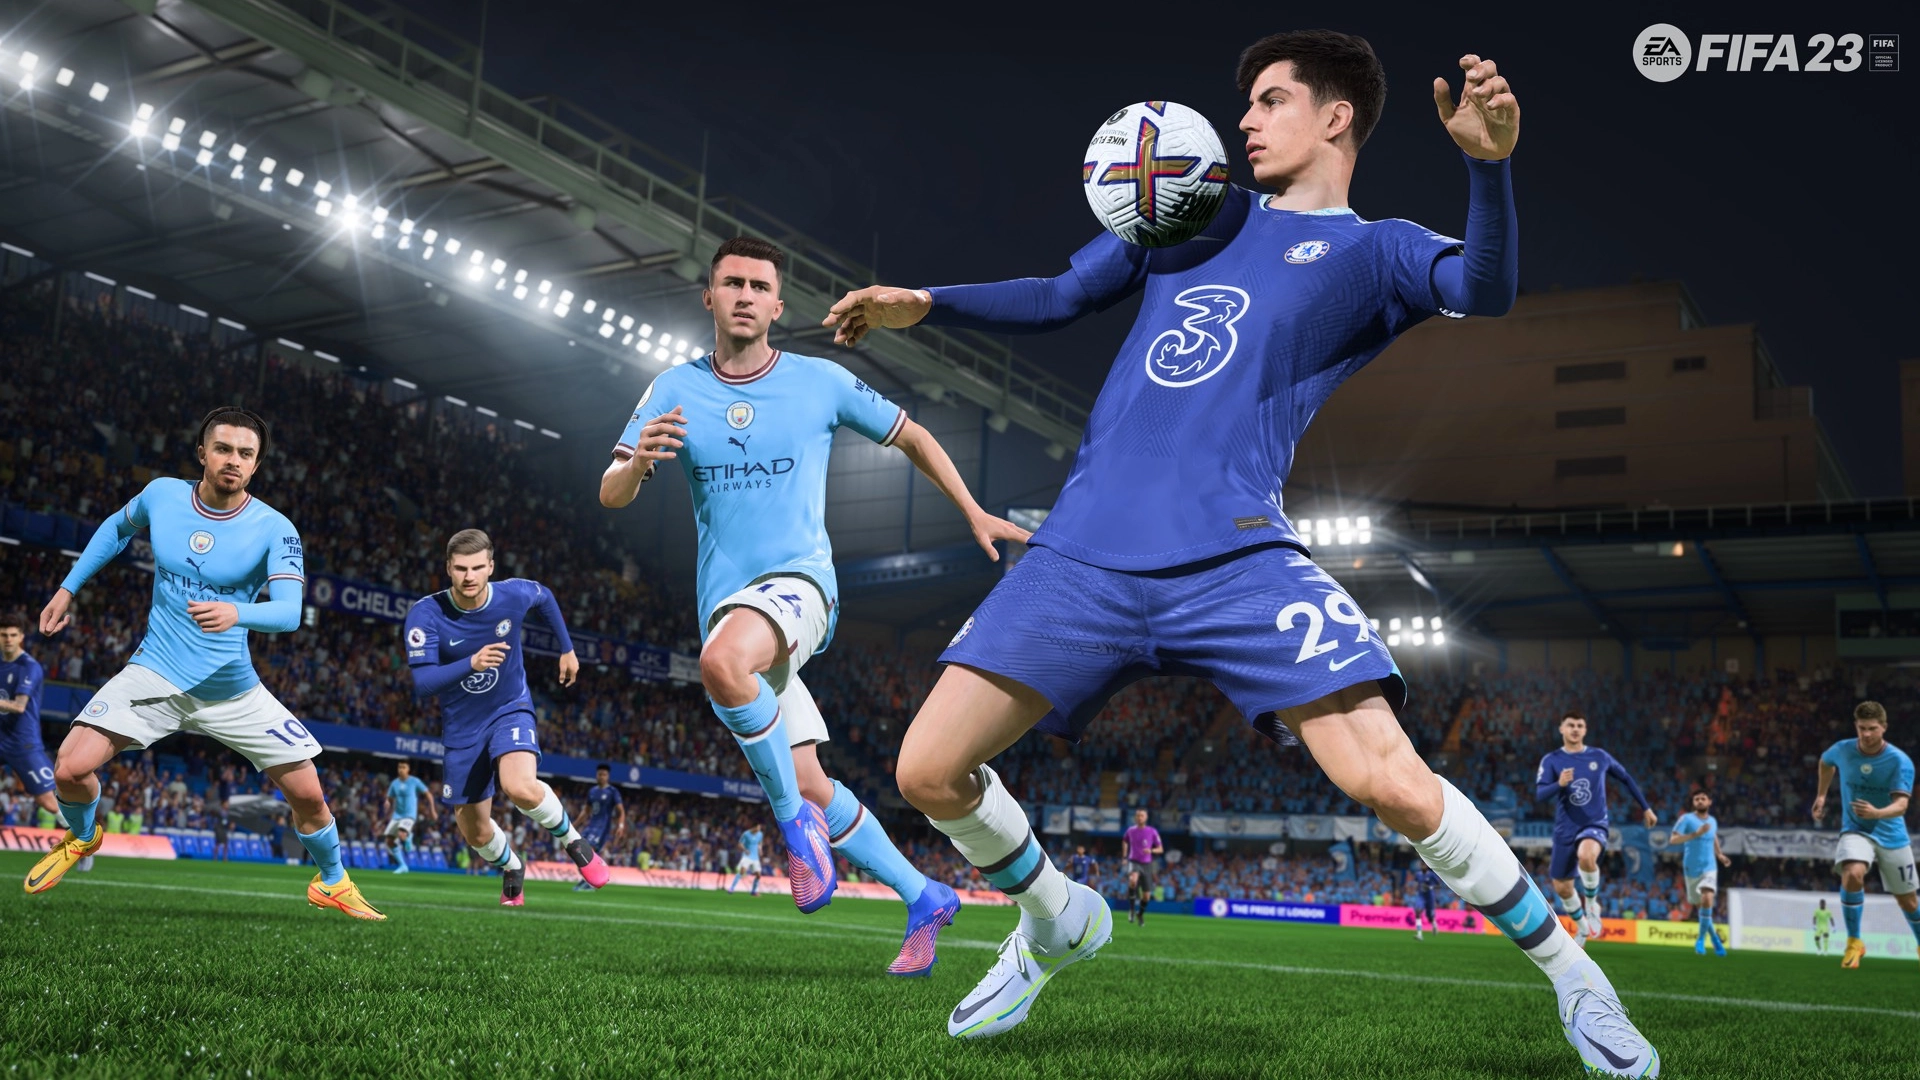 FIFA 18 MOD FIFA 23 FOR ANDROID OFFLINE WITH HD GRAPHICS, NEW TRANSFERS,  KITS 23/24 and FIFA 16 MOD 